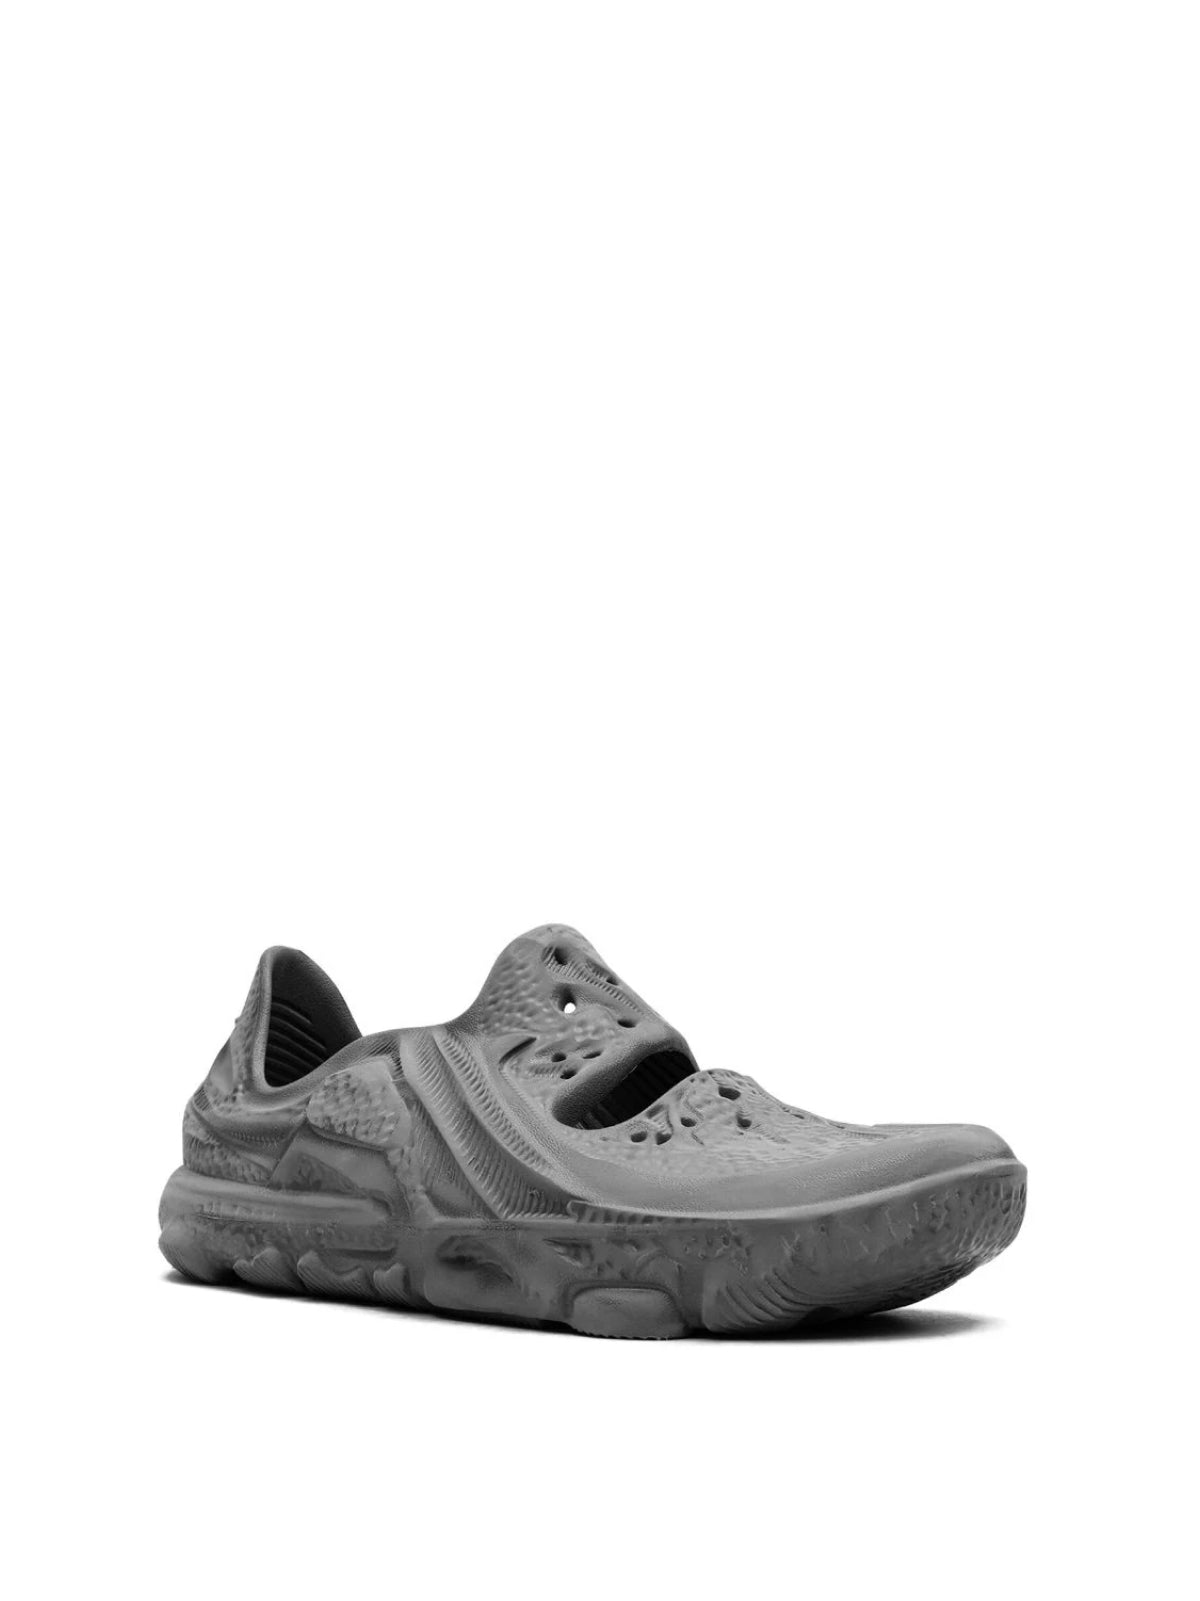 Nike-OUTLET-SALE-ISPA Universal Sneakers-ARCHIVIST